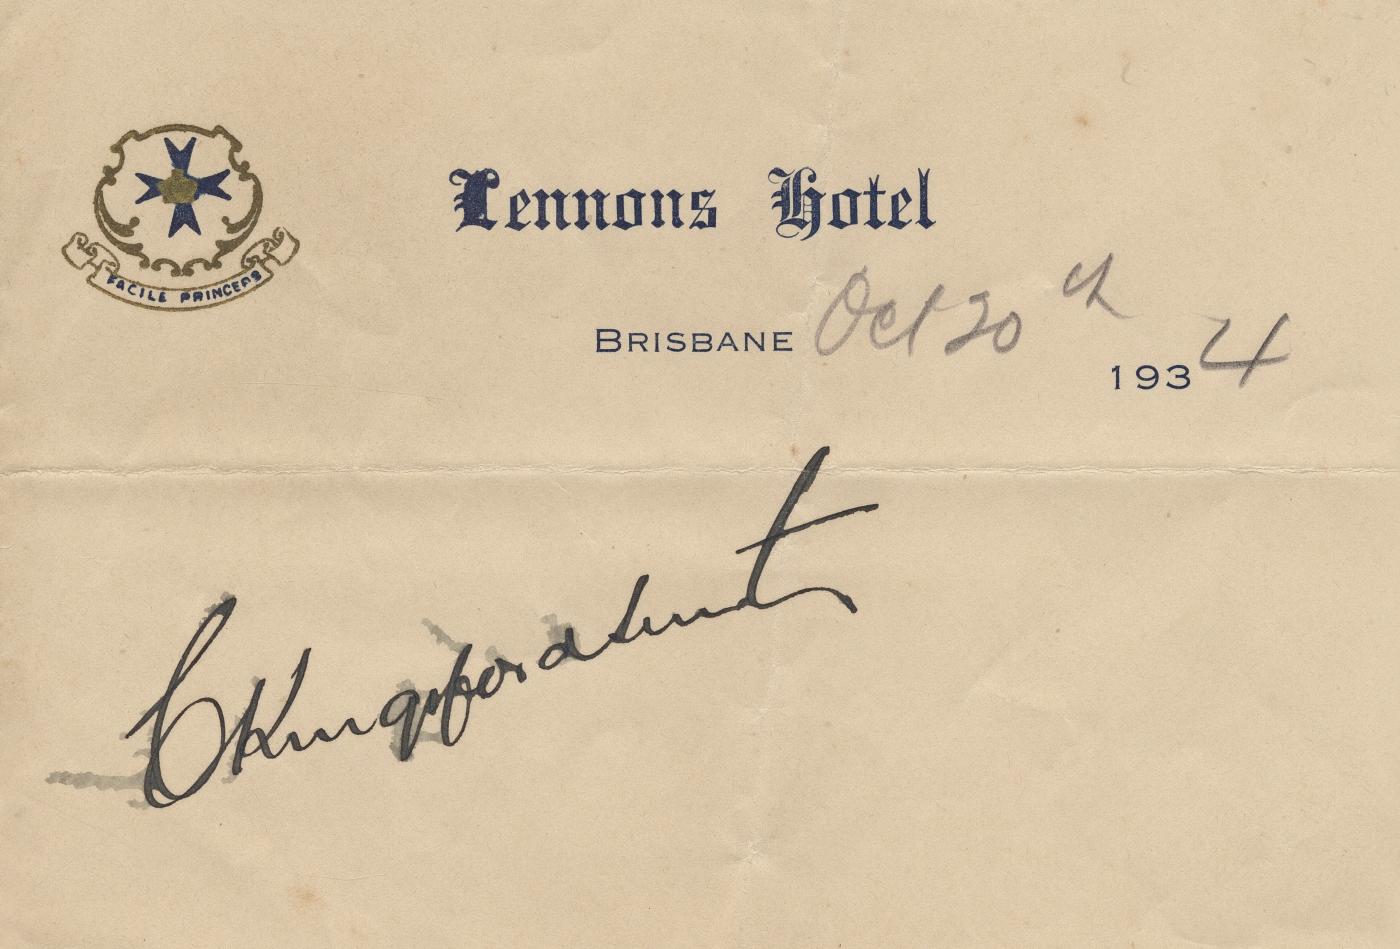 Signature of Charles Kingsford Smith on Lennon's Hotel notepaper